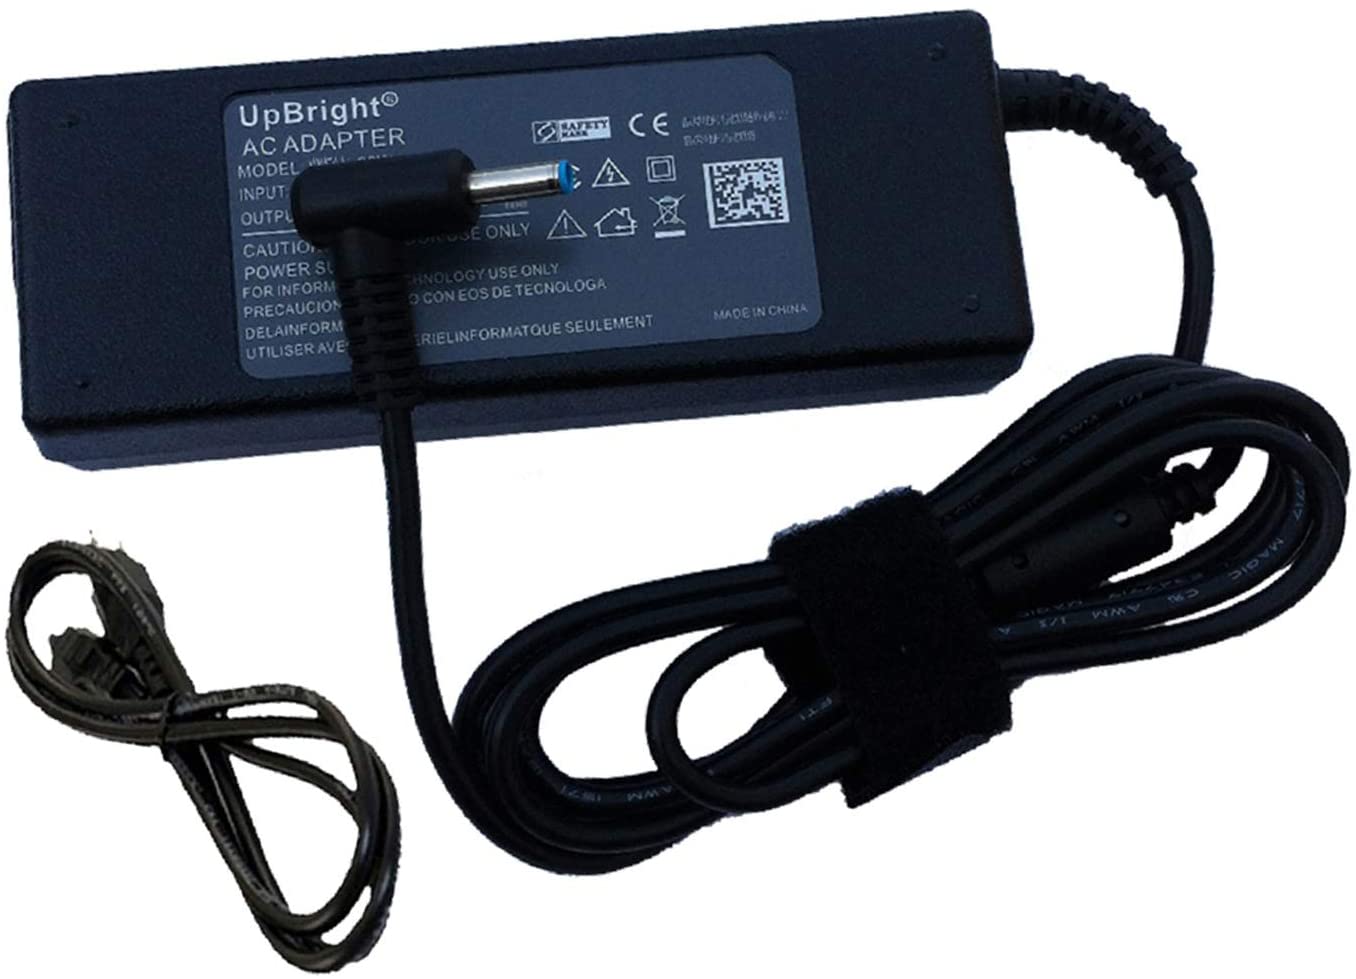 UPBRIGHT NEW 19.5V 3.33A 65W Global AC / DC Adapter For Hp Pavilion 15-g030wm 15-g249ca 15-g280nr 15-g279nr 15-G031CY 15.6"Laptop Notebook PC 19.5VDC 19.5 Volts Power Supply Cord - image 1 of 5